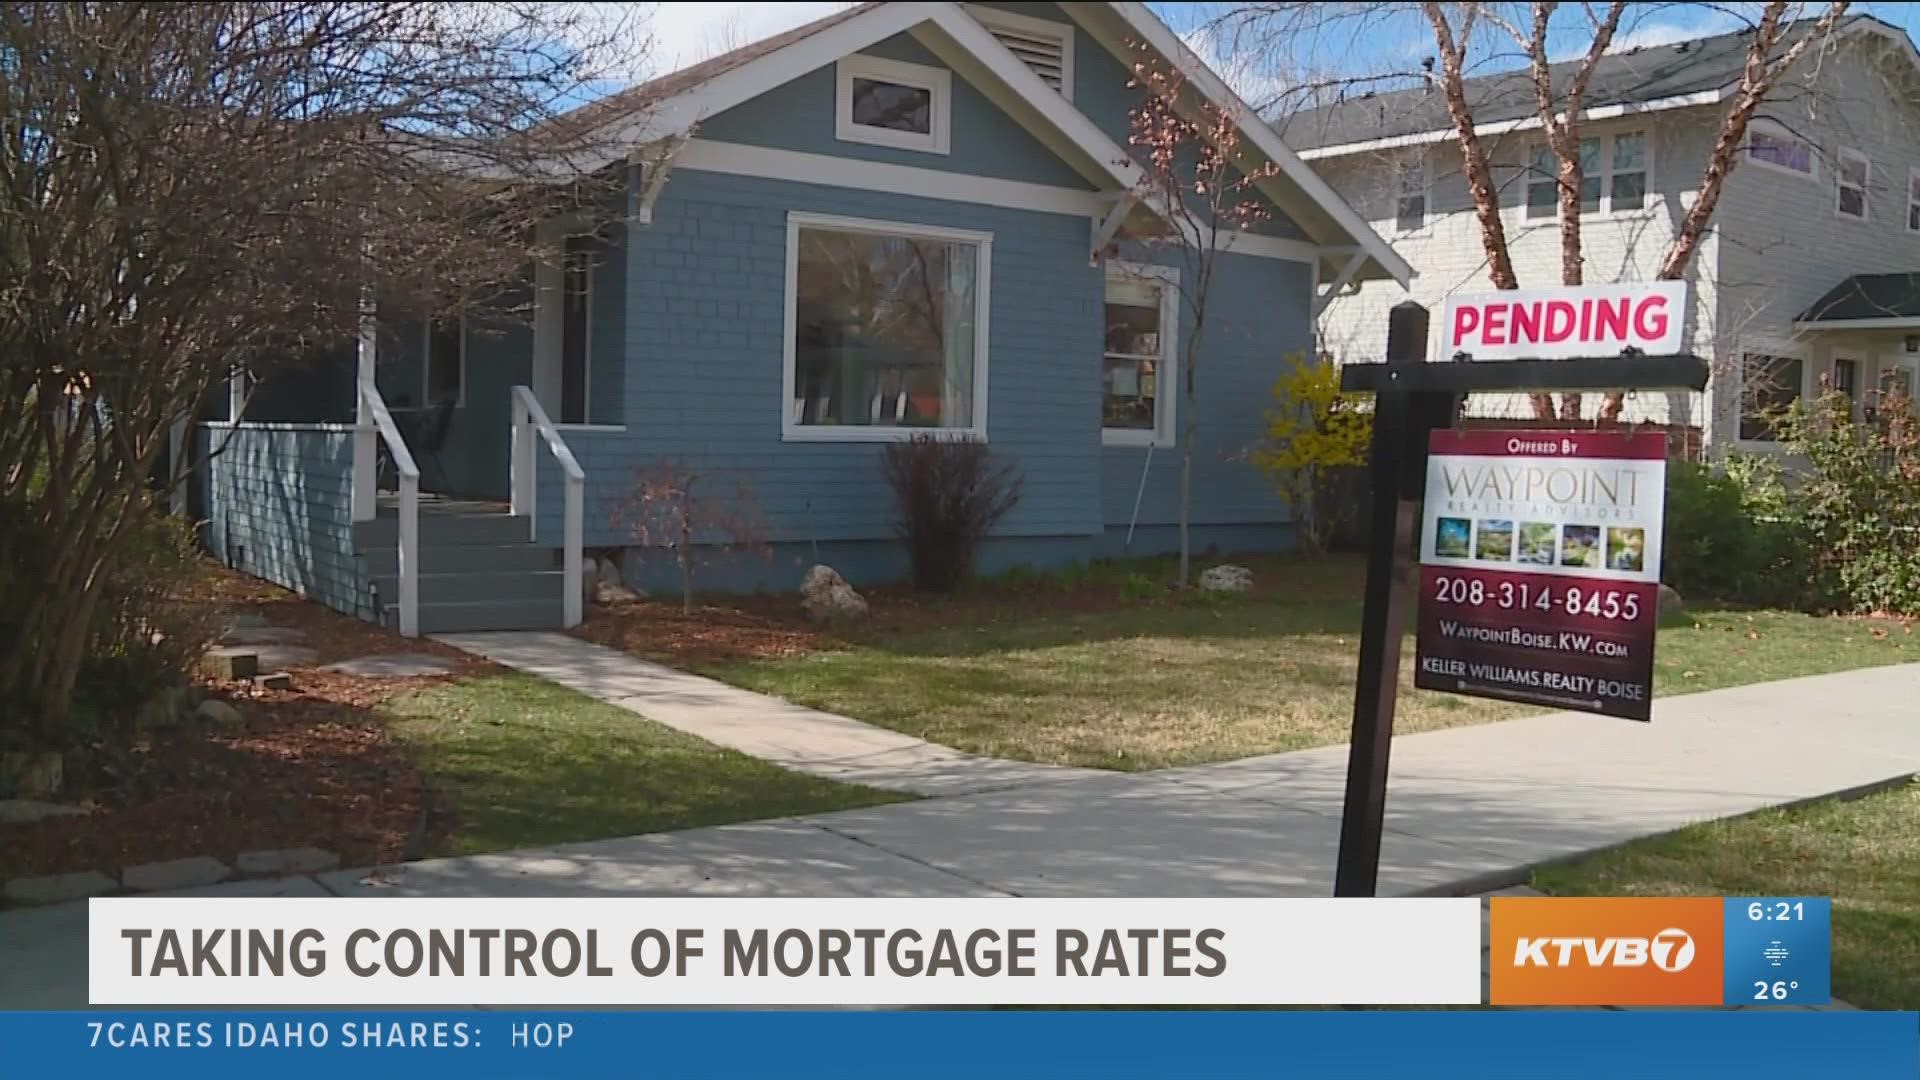 Rate forecasts for 2023 range from 5.2% to 7.4%. Idahoans have some options to keep the cost of buying a home in check.